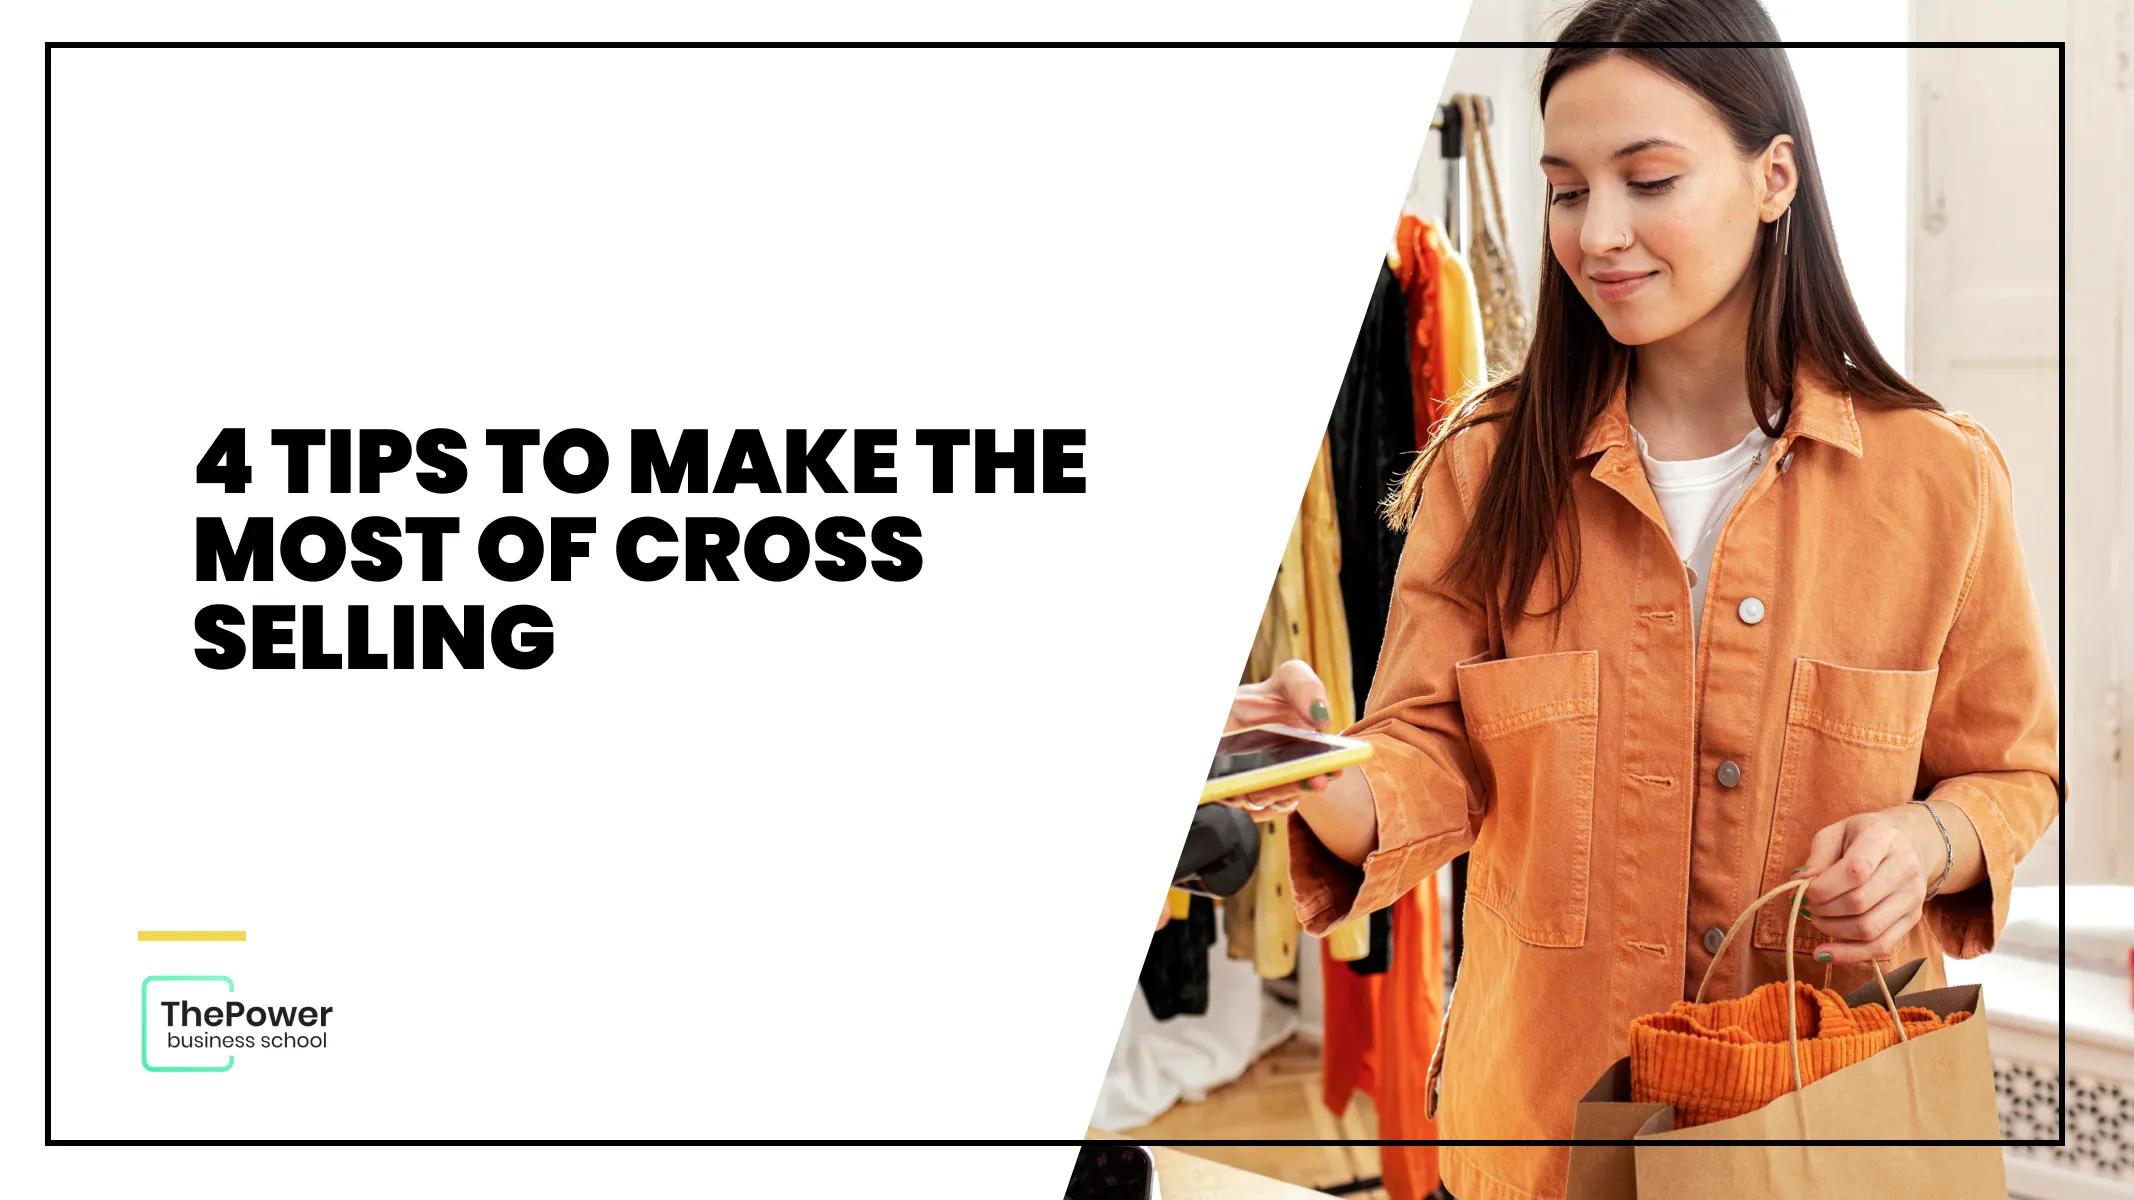 Advantages of cross-selling